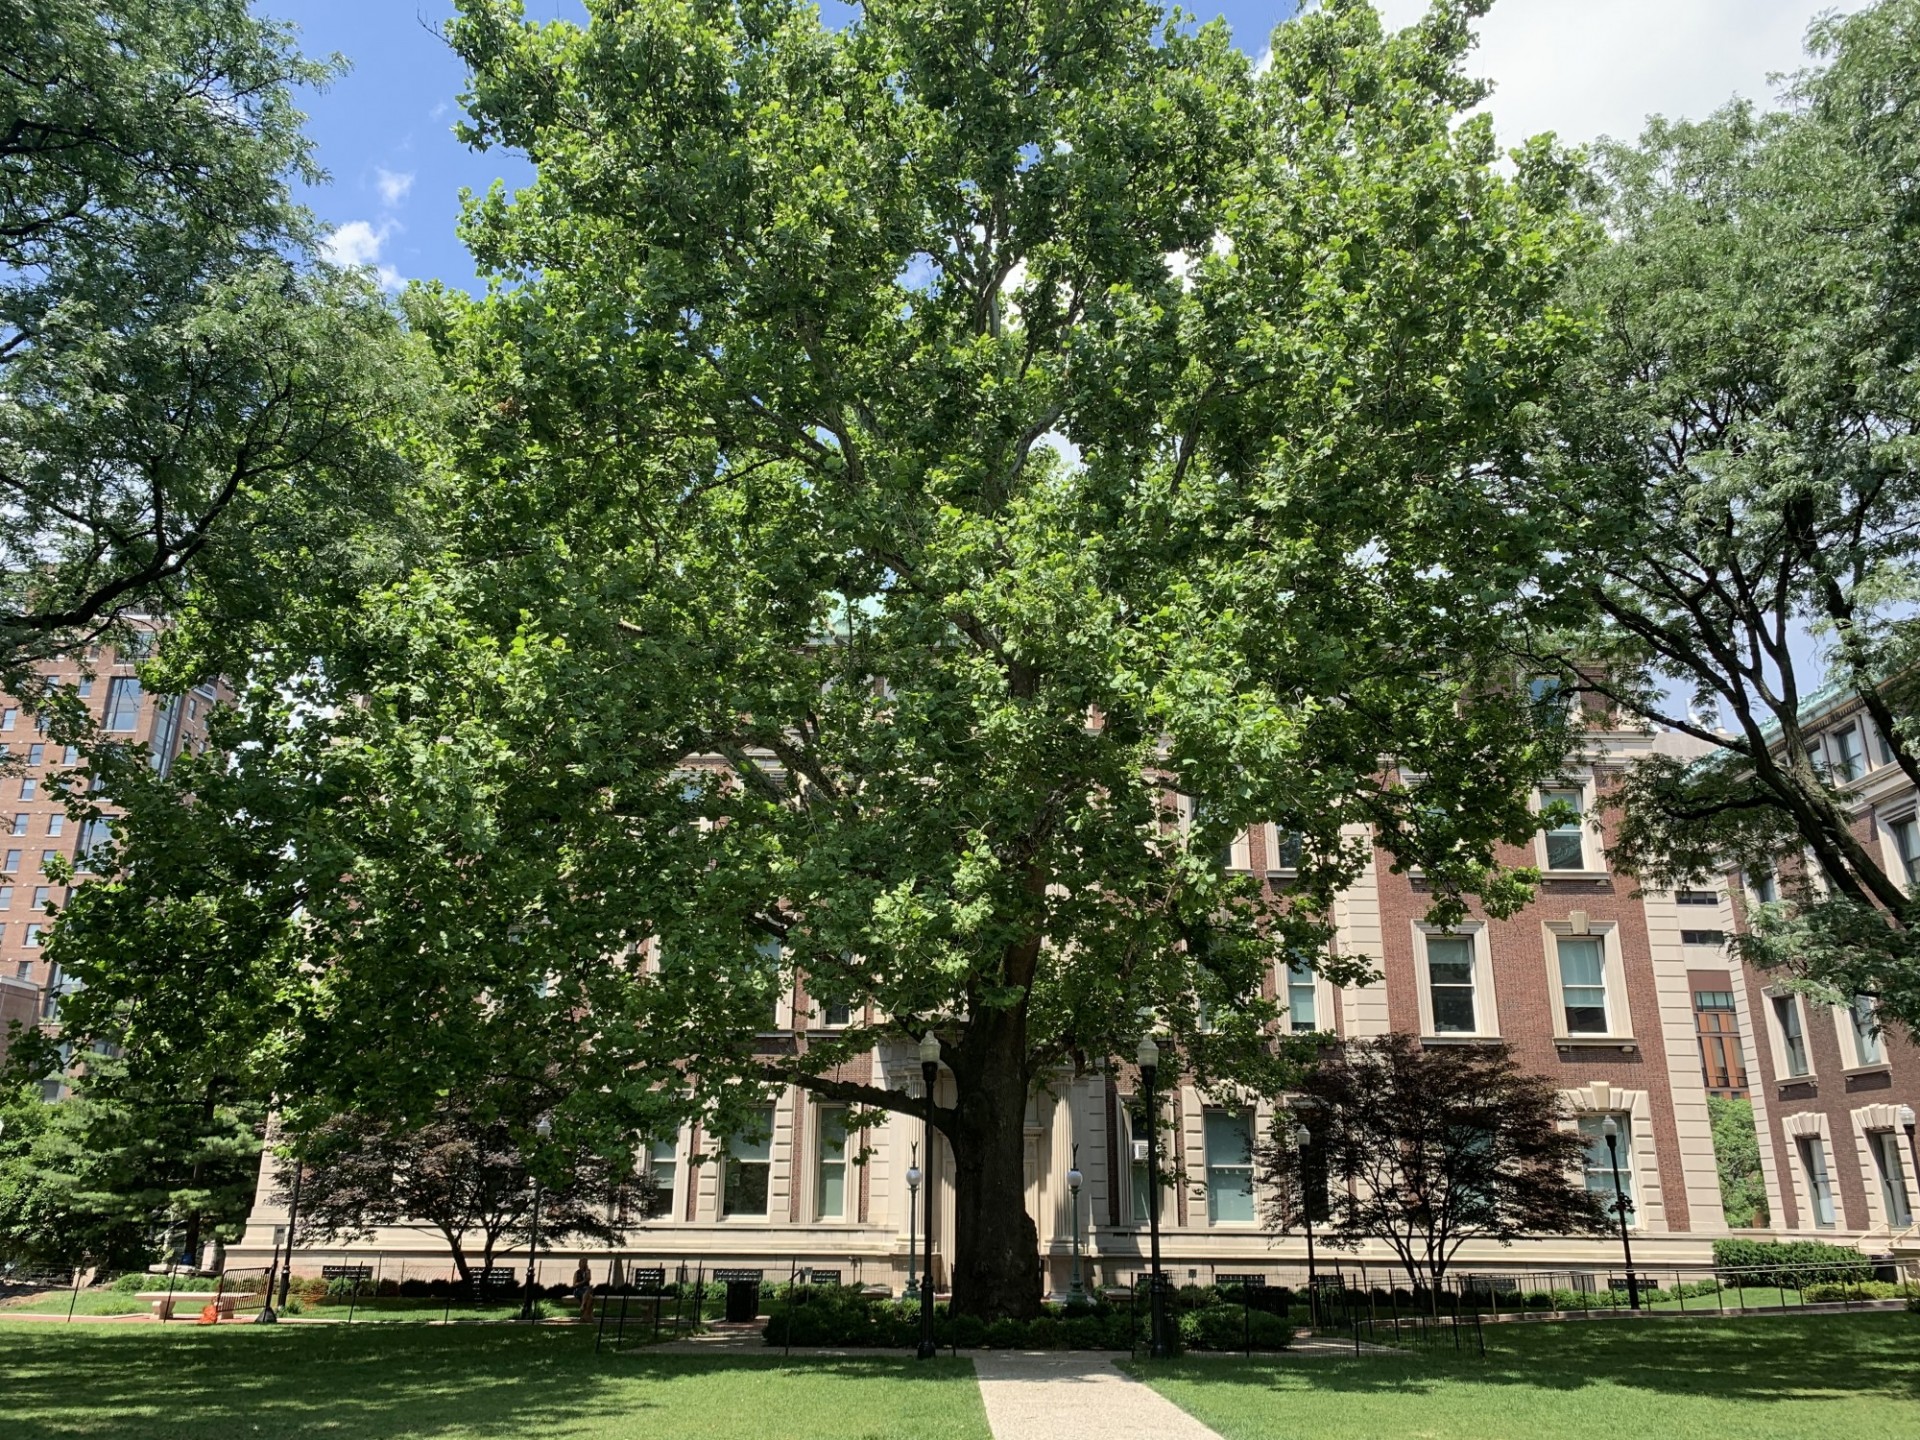 American Sycamore tree outside of the Mathematics building